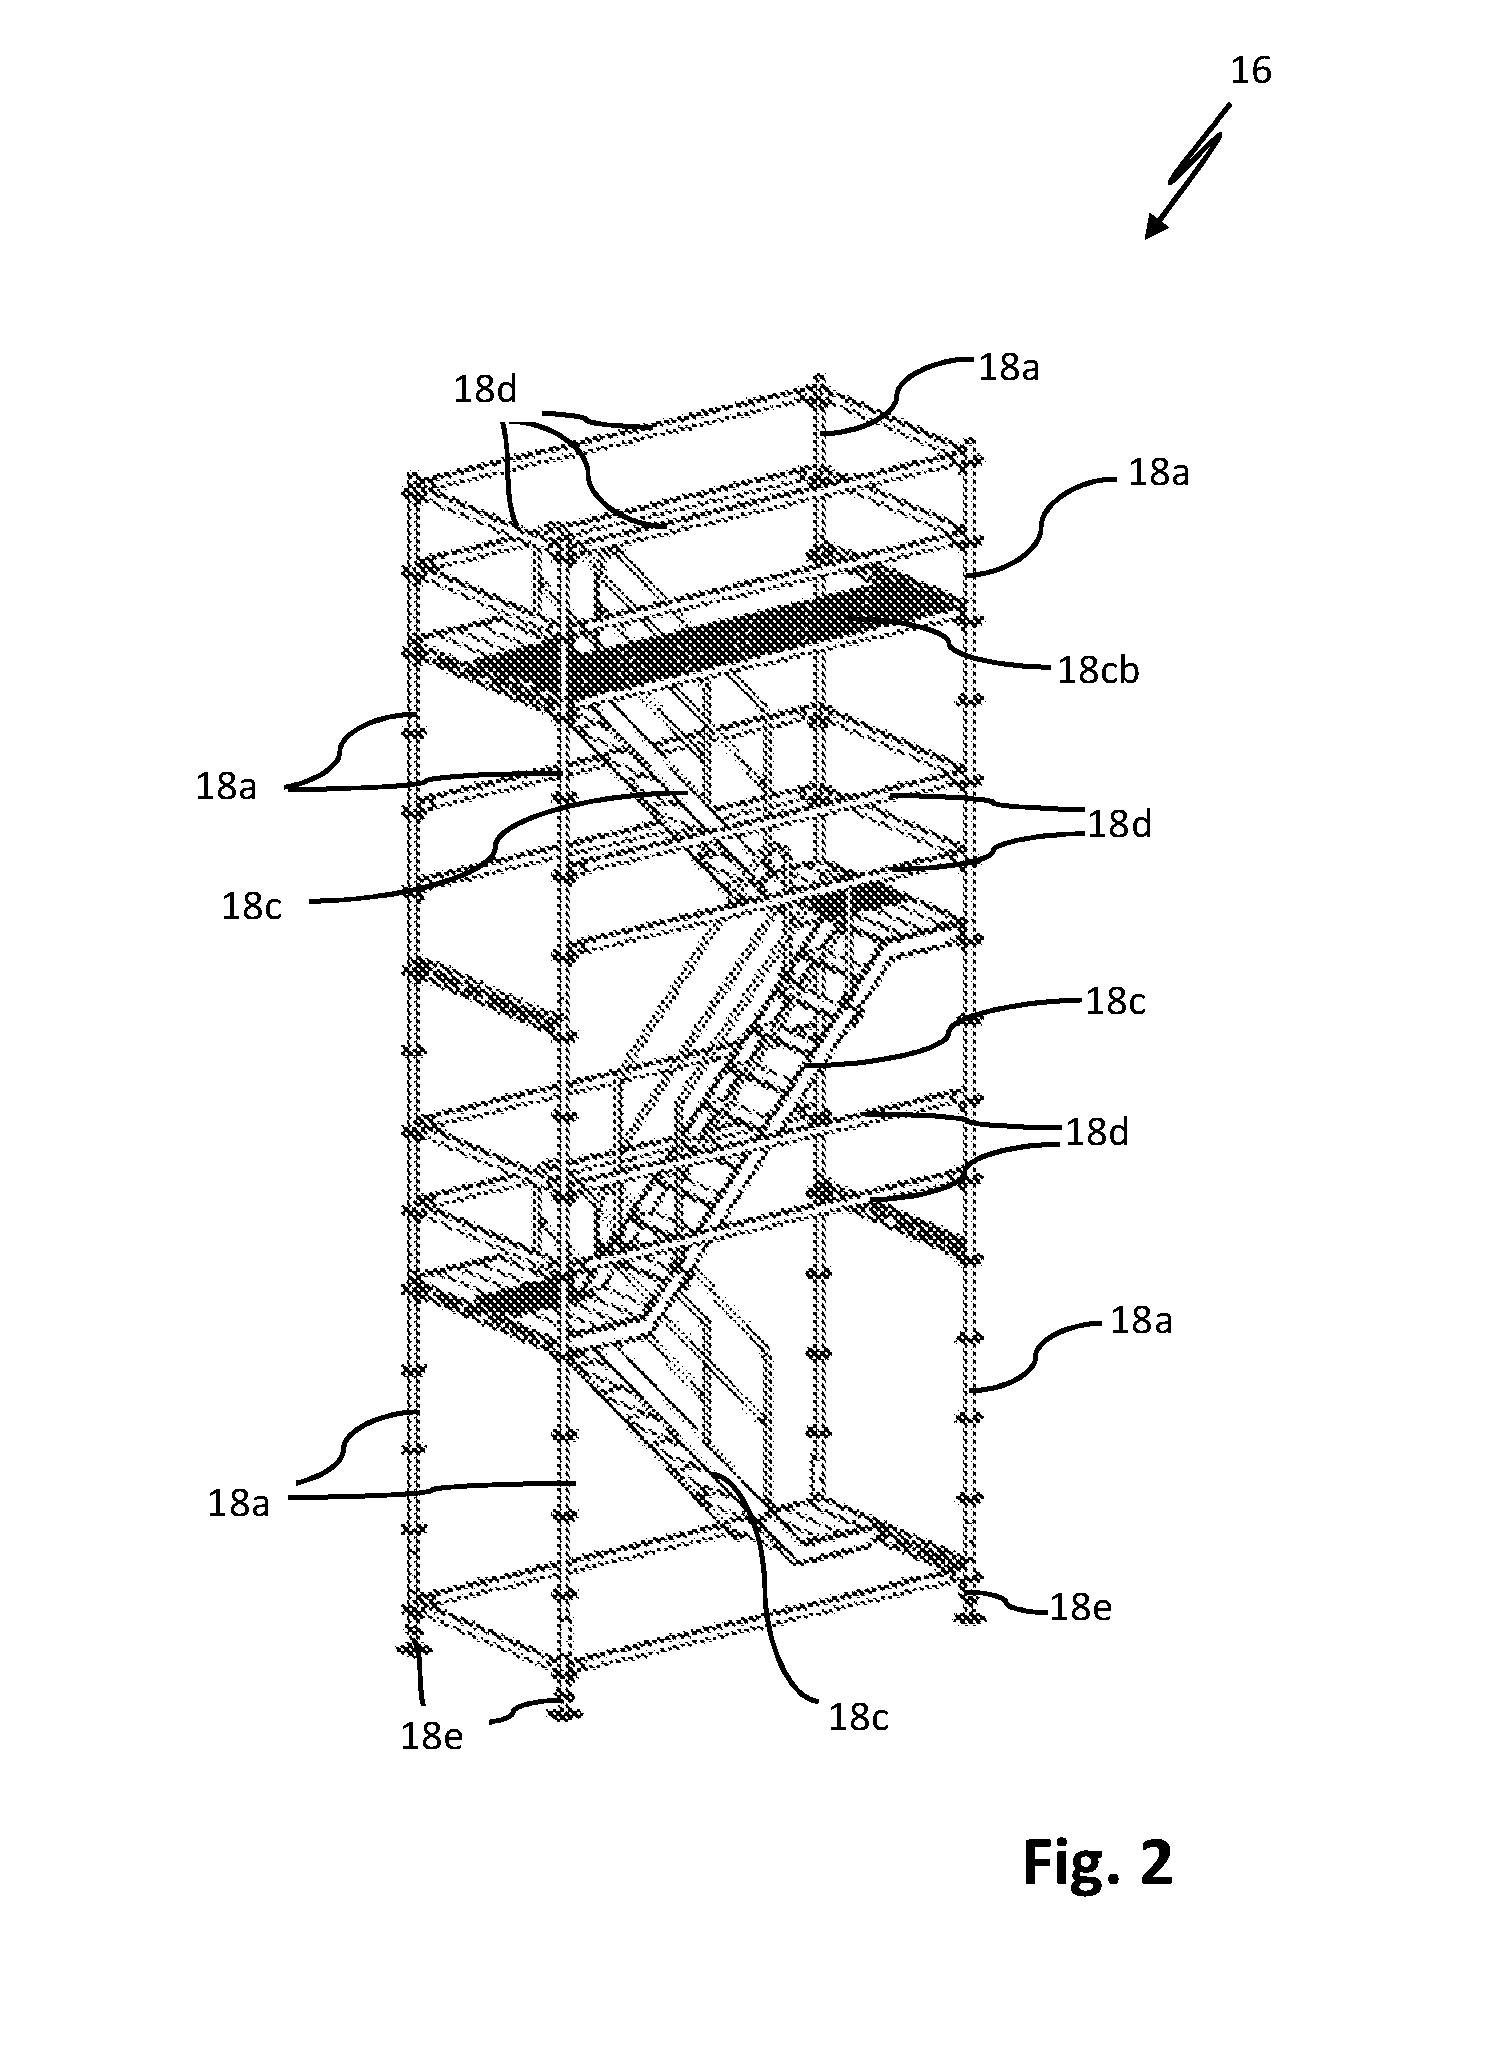 Method for providing and assembling scaffolding units, each of which will be assembled from individual scaffolding components for constructing an industrial plant, in particular a petroleum refinery